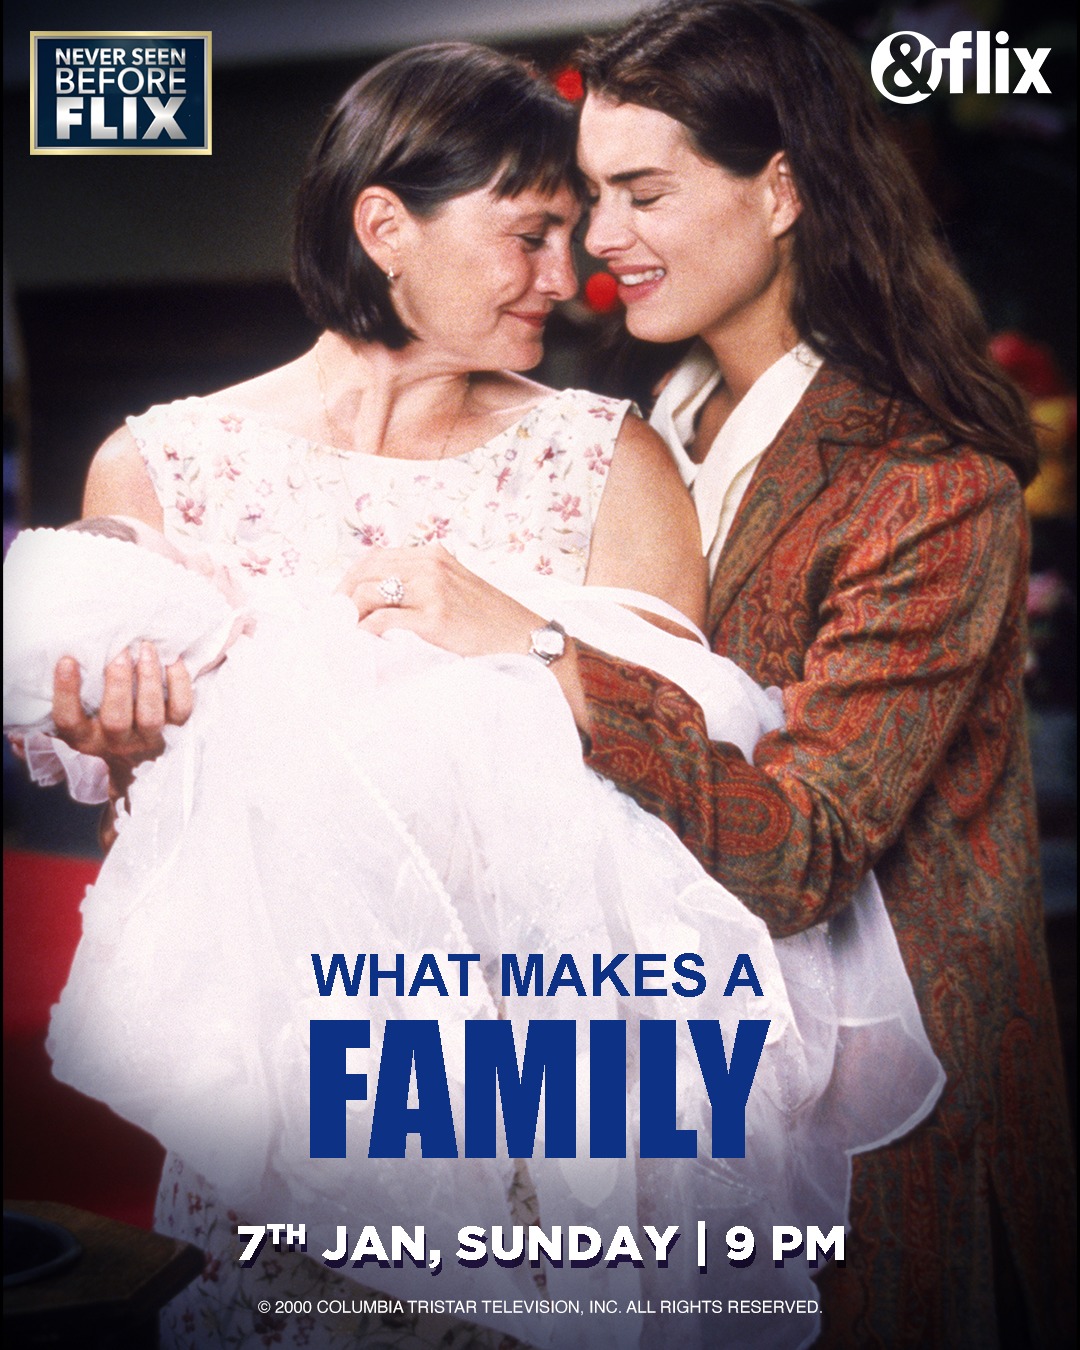 Experience the heart-warming love story of two homosexual woman in “What Makes a Family” this Sunday on &flix